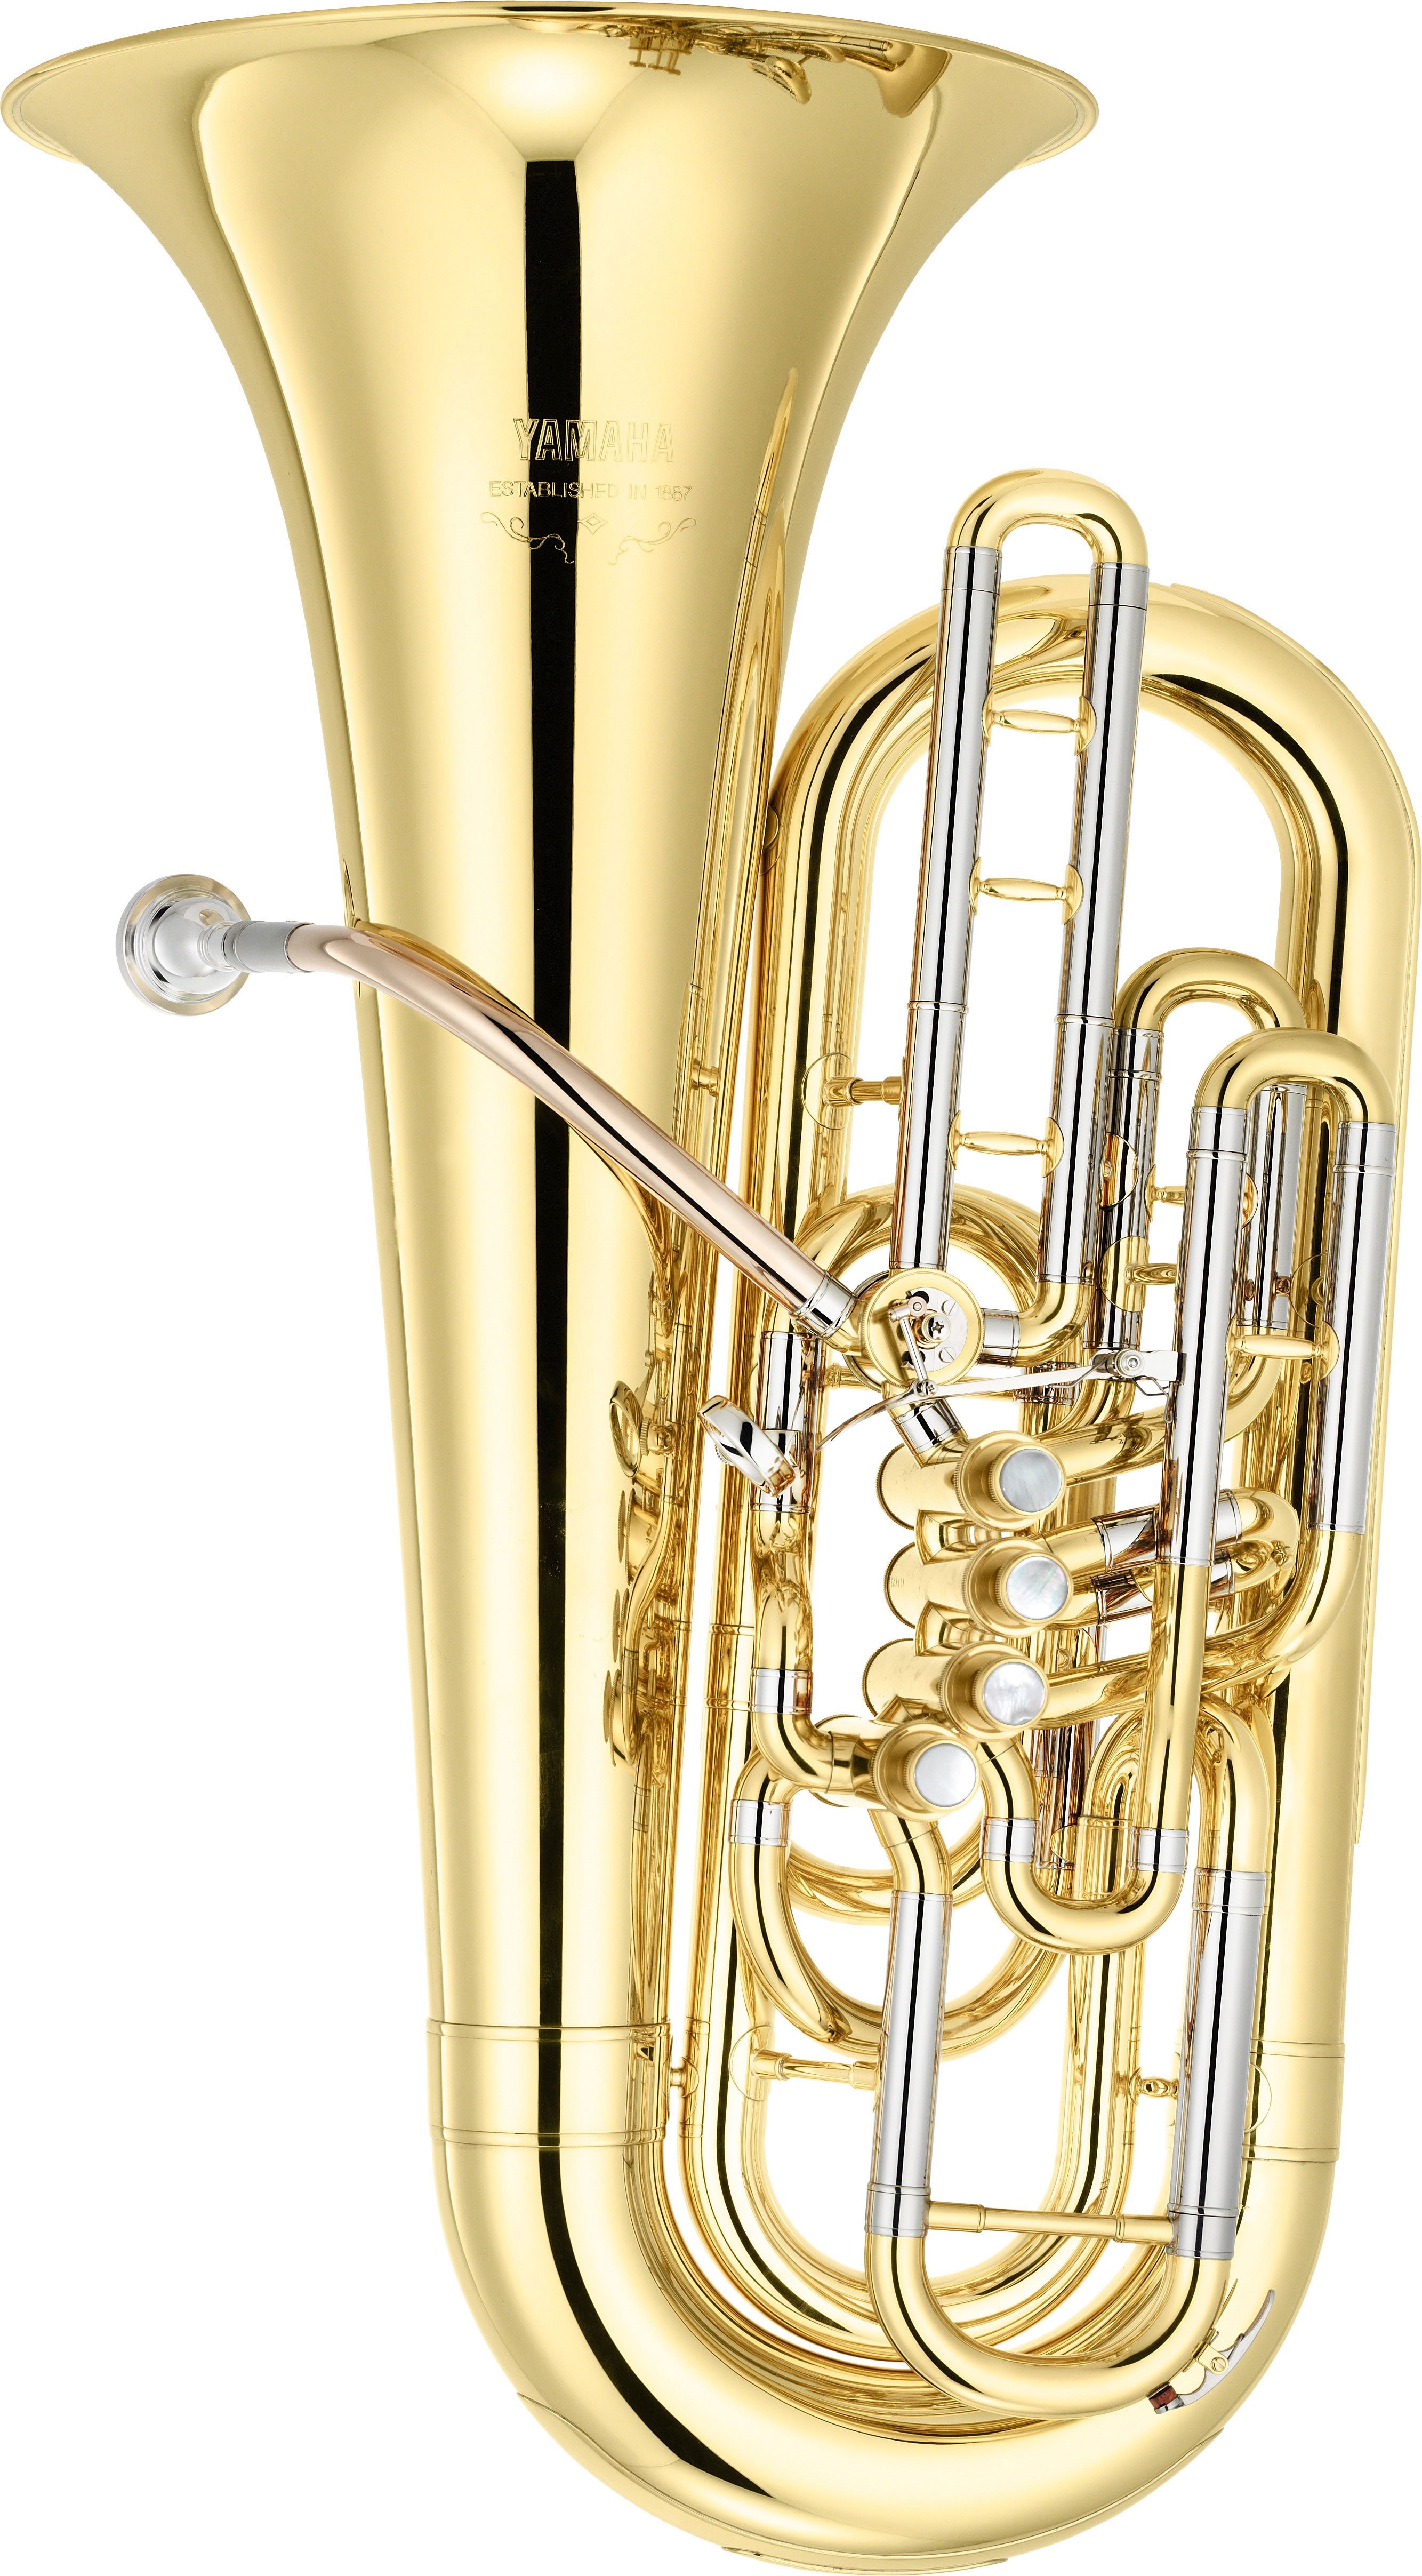 YFB-621 - Overview - Tubas - Brass & Woodwinds - Musical 